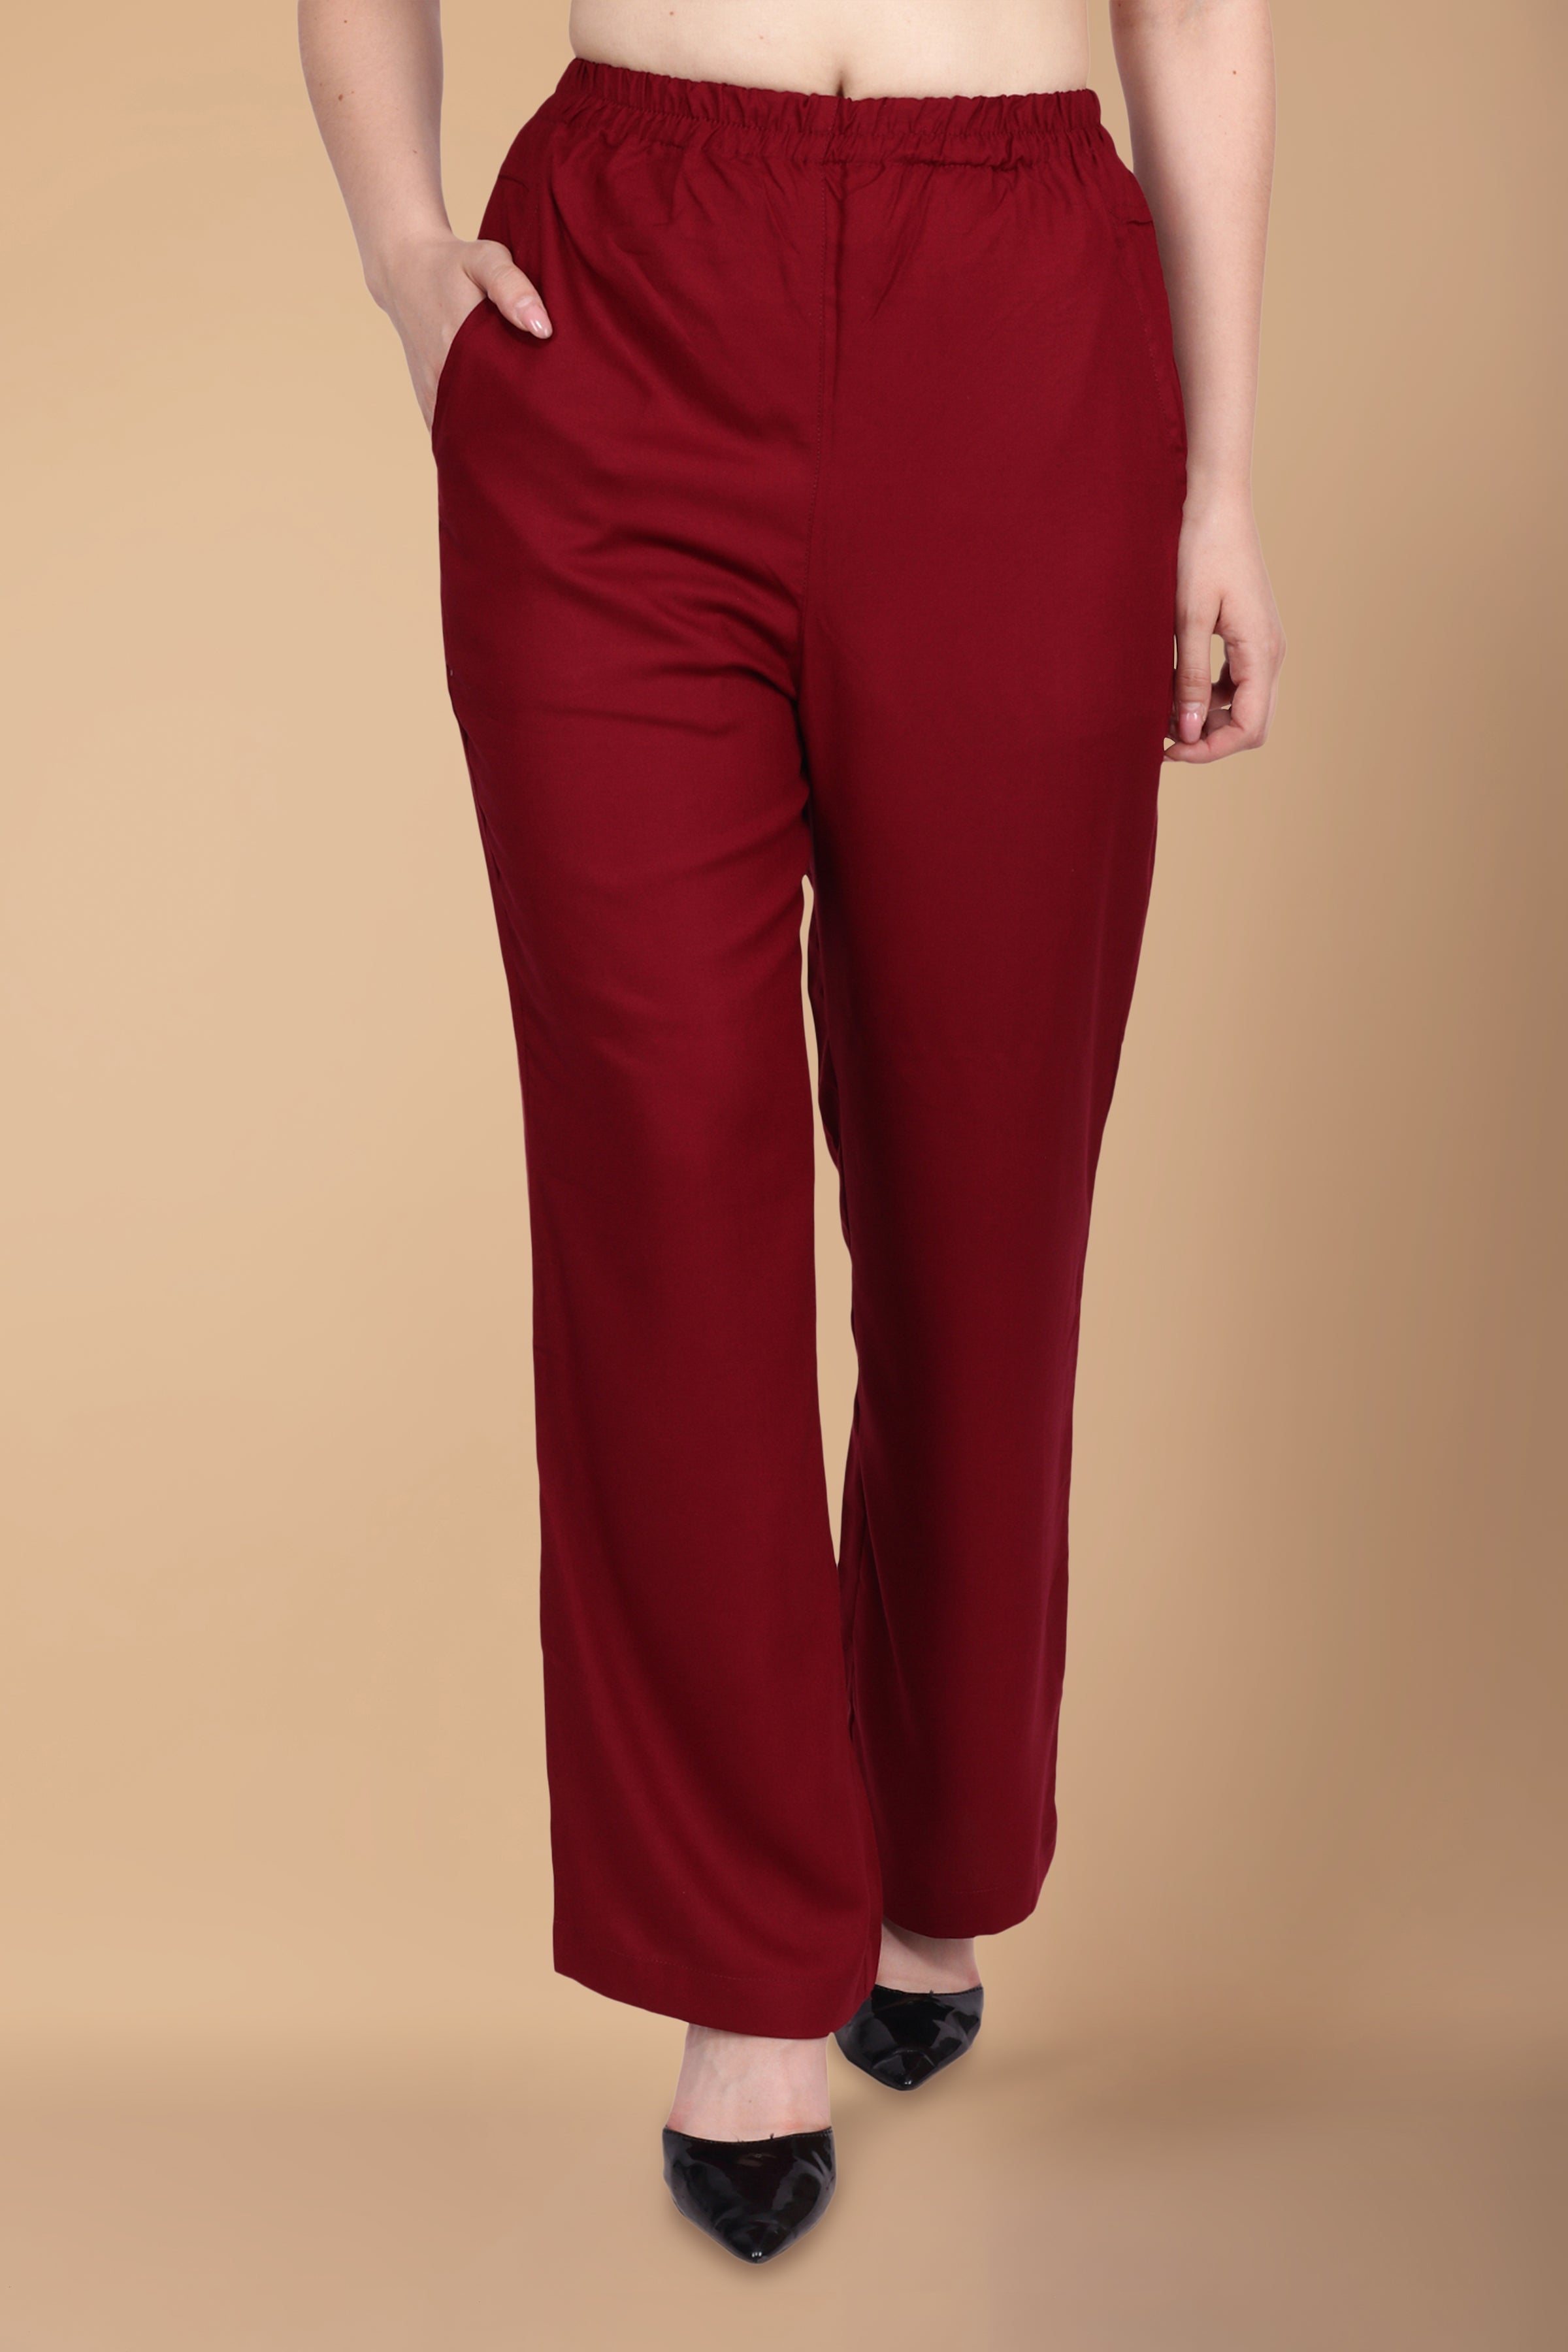 Buy Maroon Rayon Palazzo Pant For Women At Low Price Online